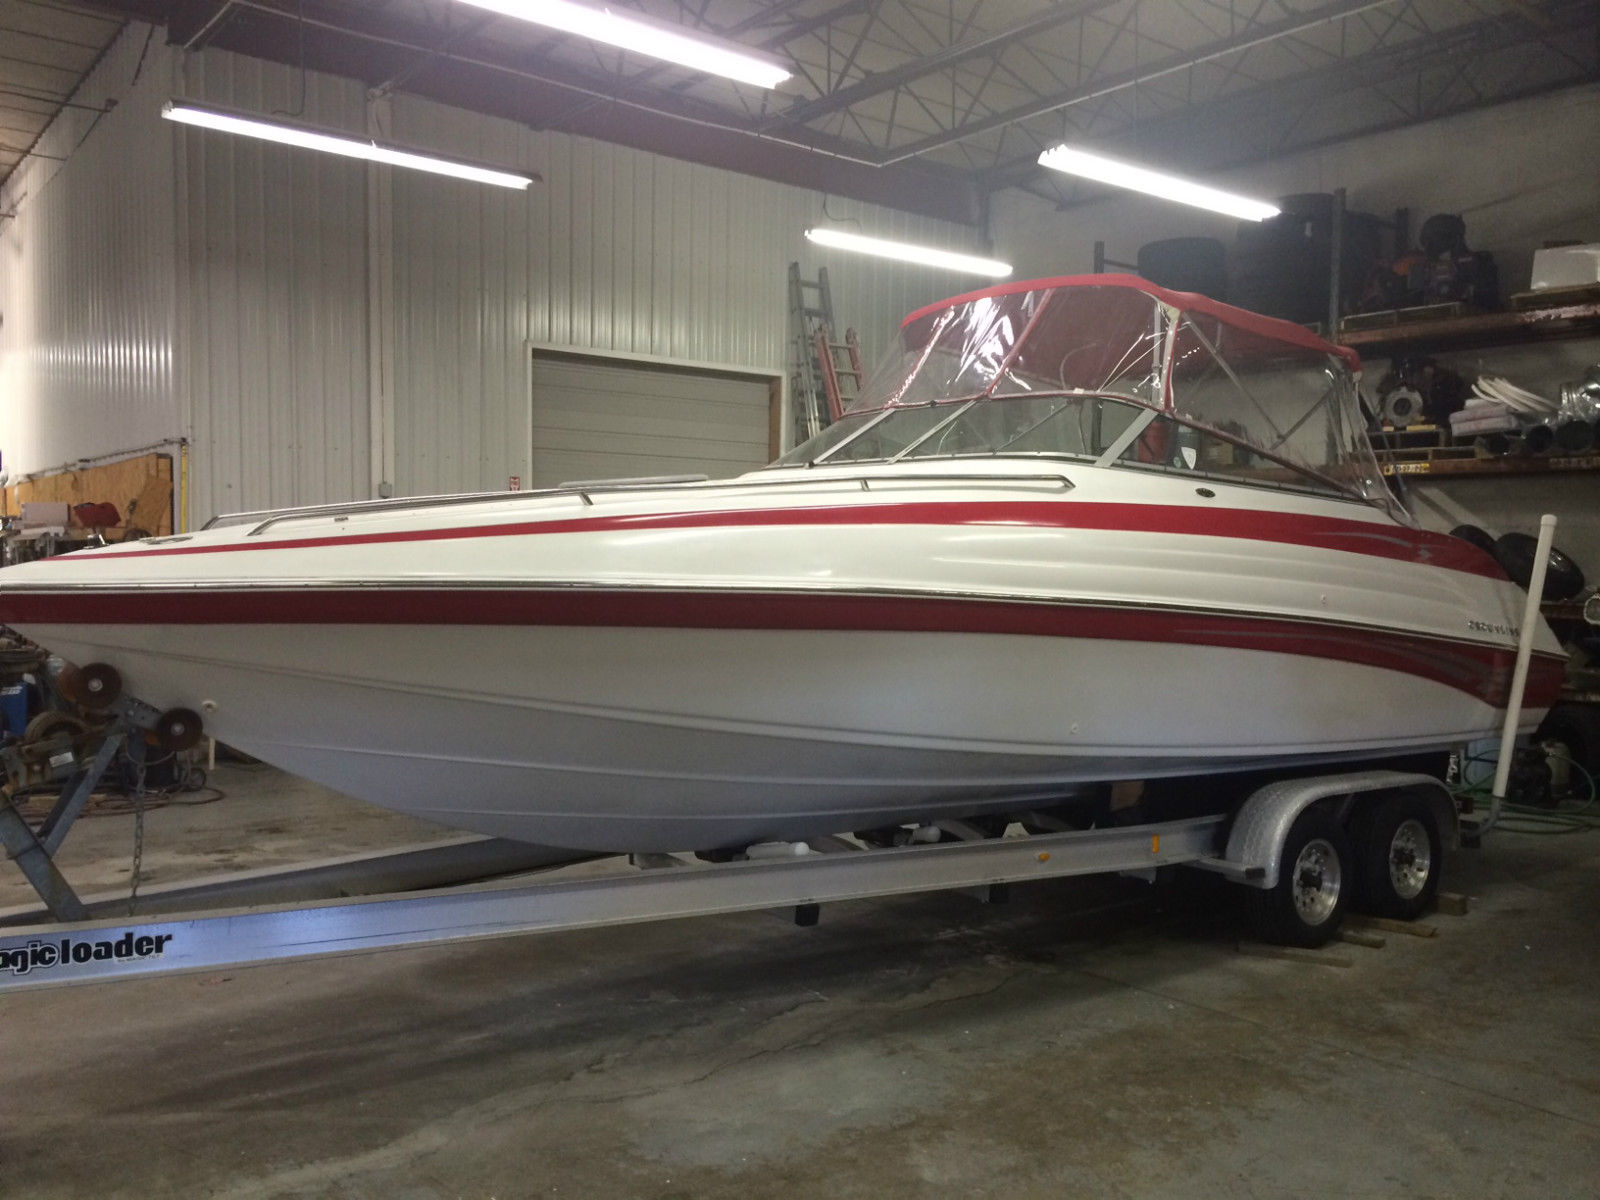 Crownline 266 CCR 2000 for sale for $18,500 - Boats-from 